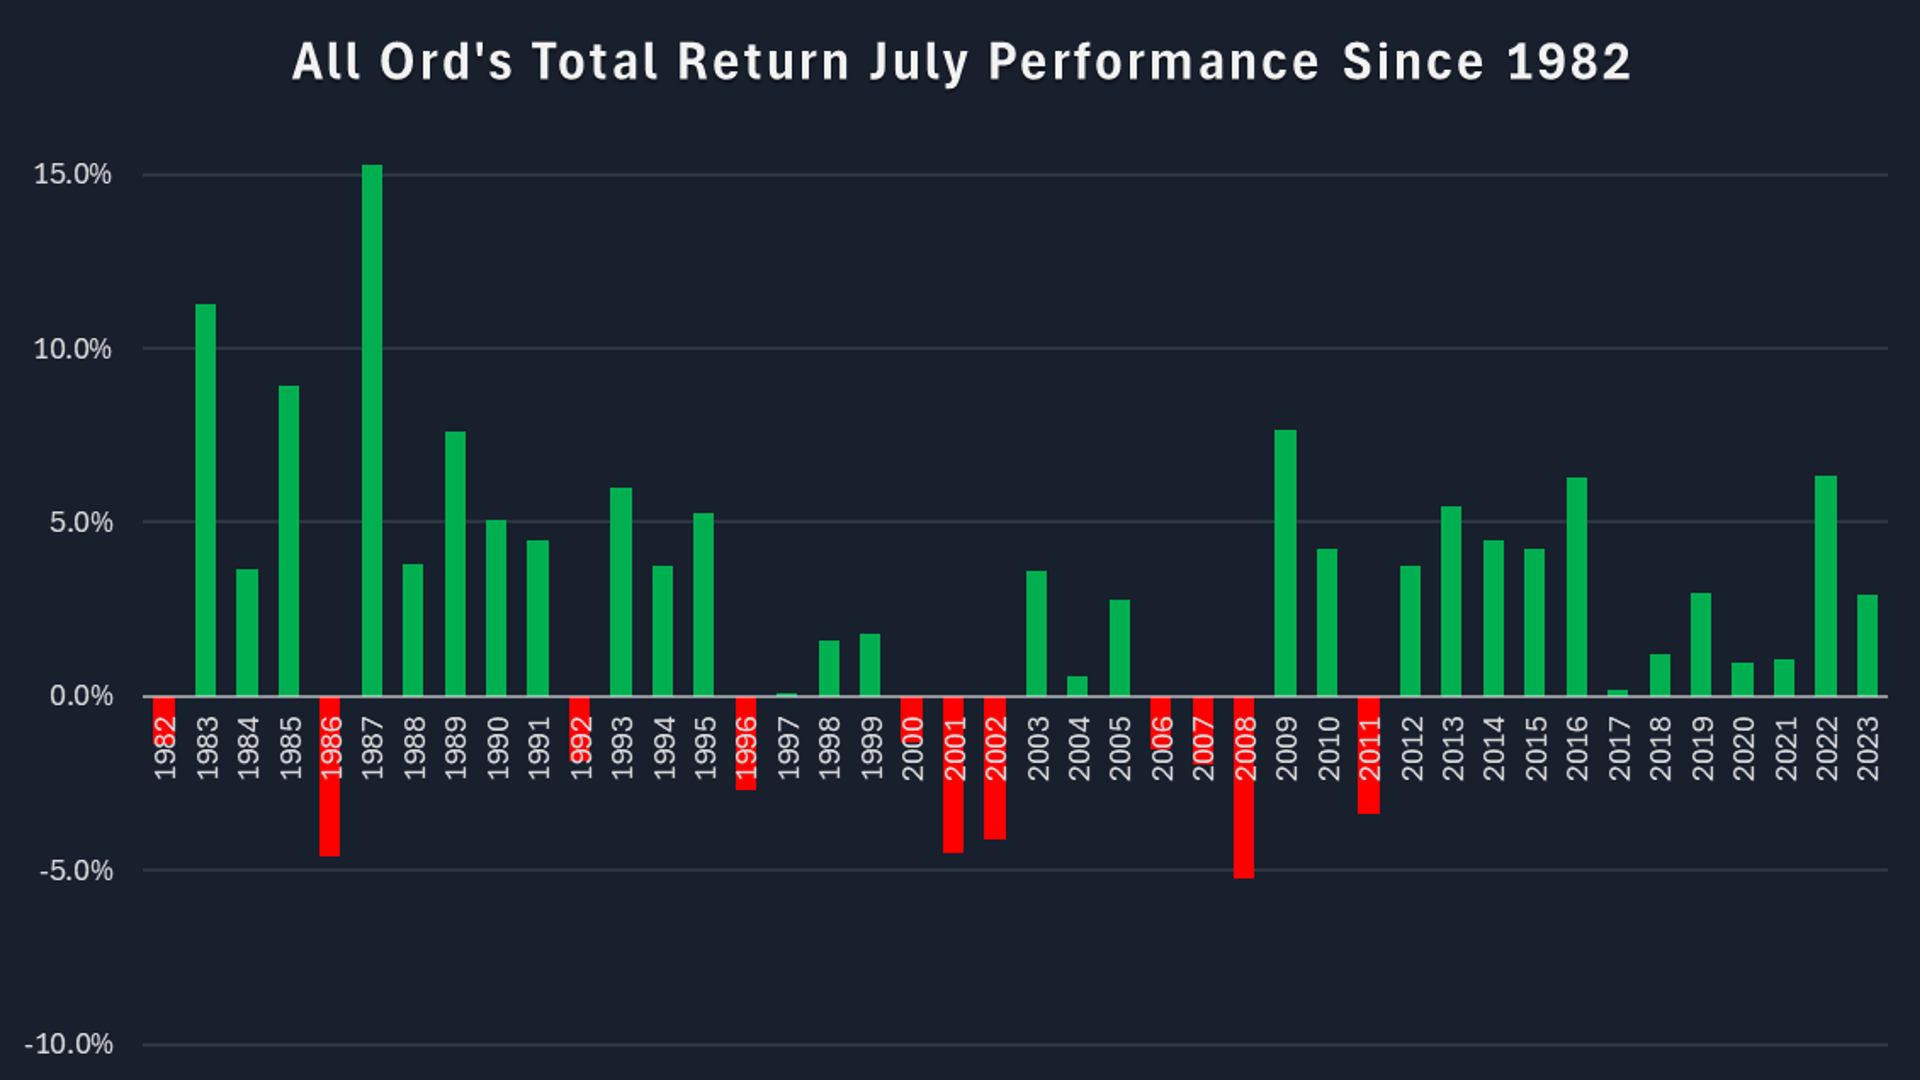 All Ord’s Total Return July Performance Since 1982 Years. Source: Me!